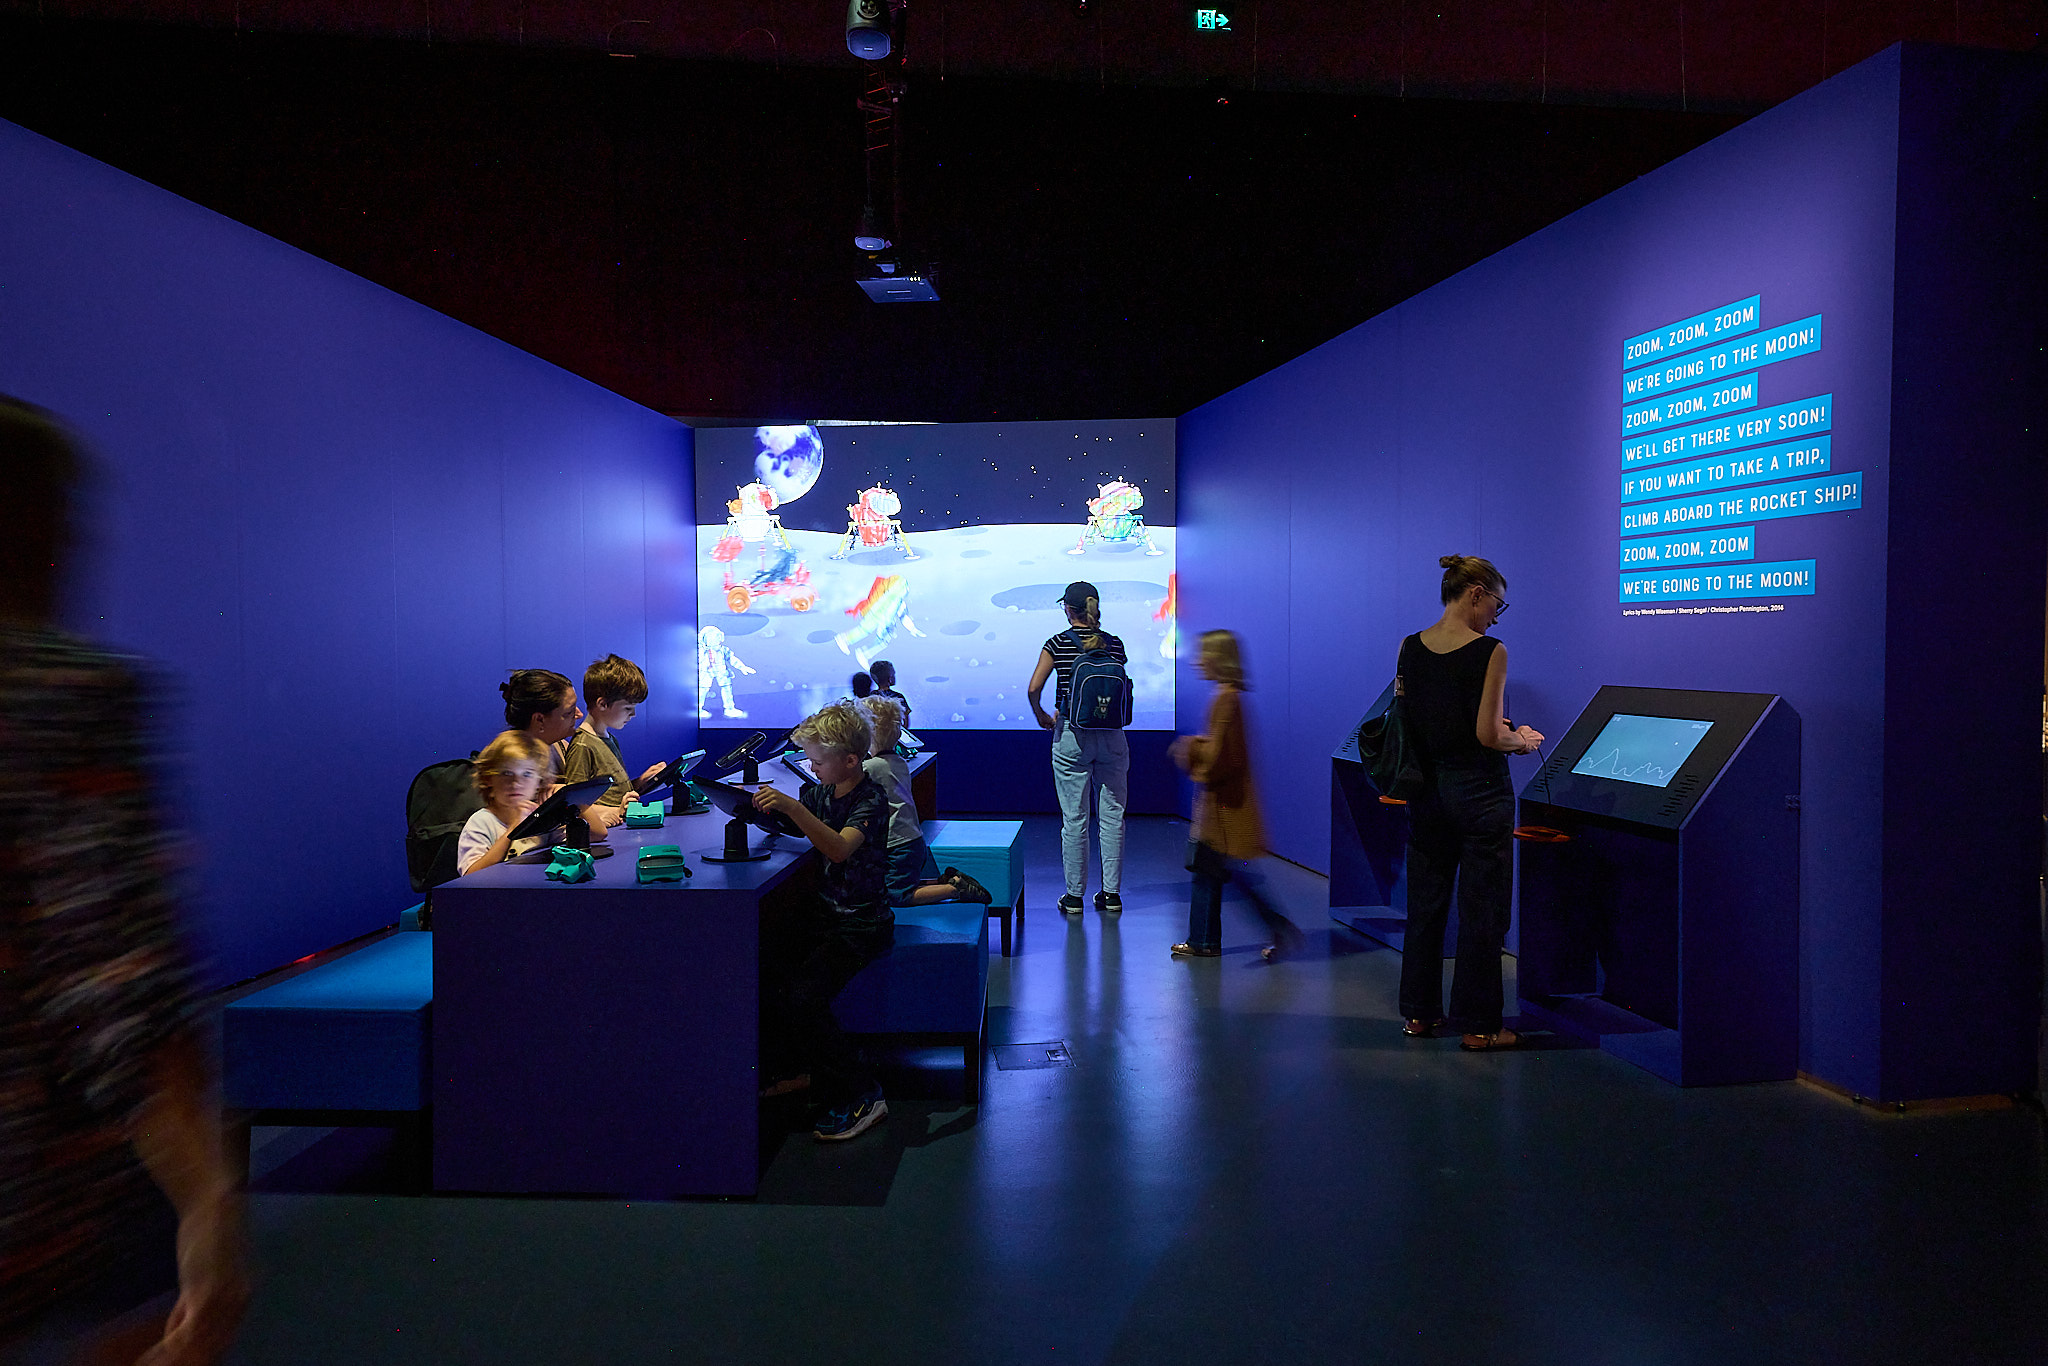 Children and adults using interactive screens in a blue-themed room with a space animation display in the background.